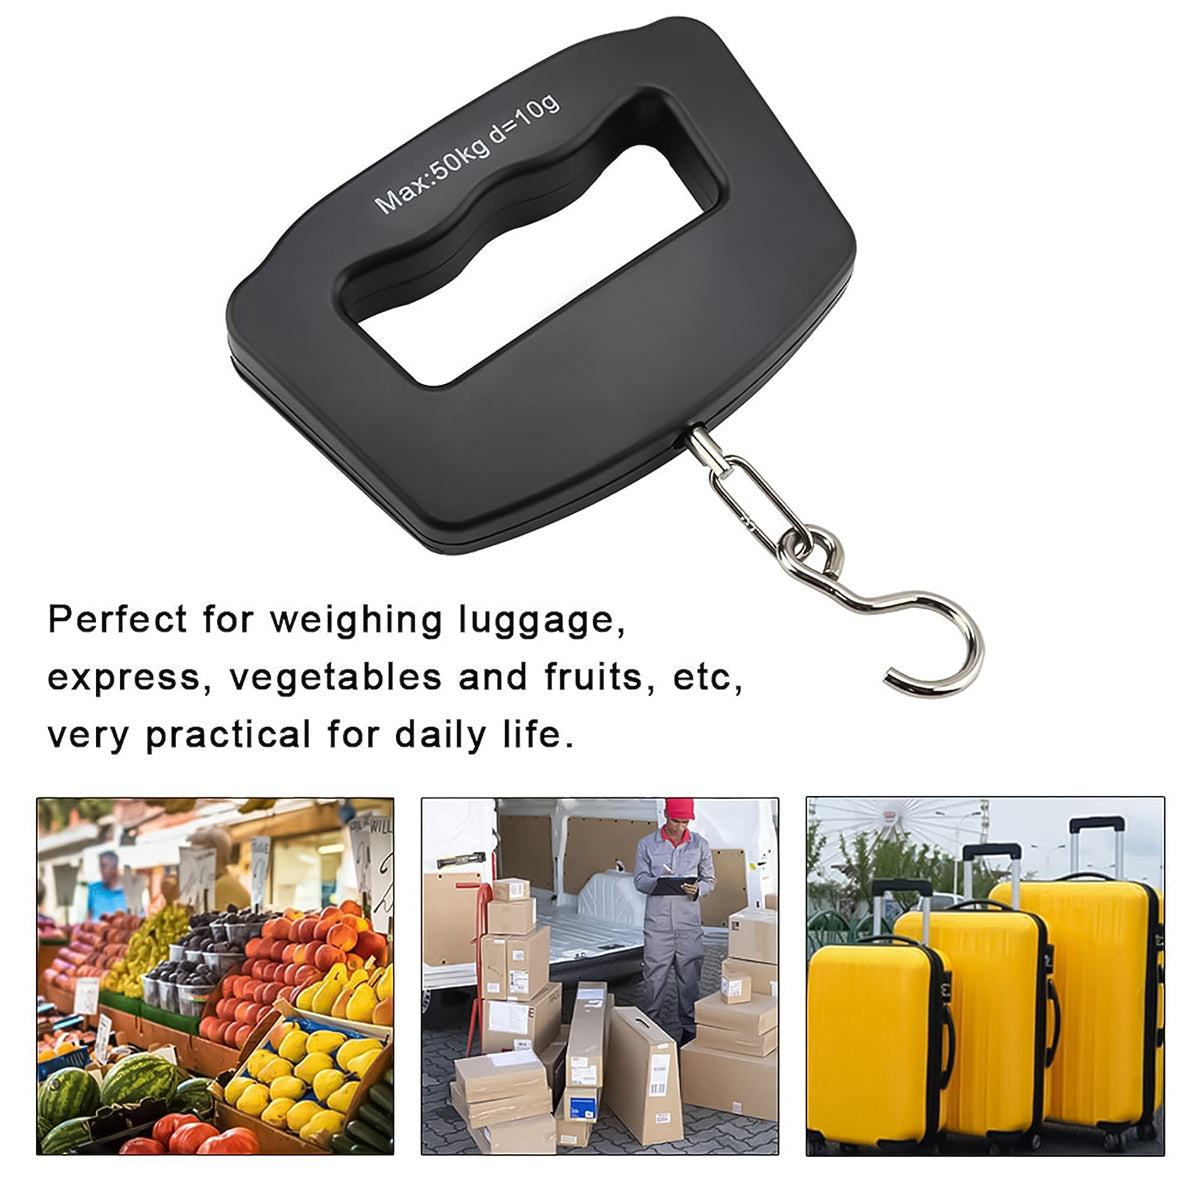 Digital Scale for Suitcase